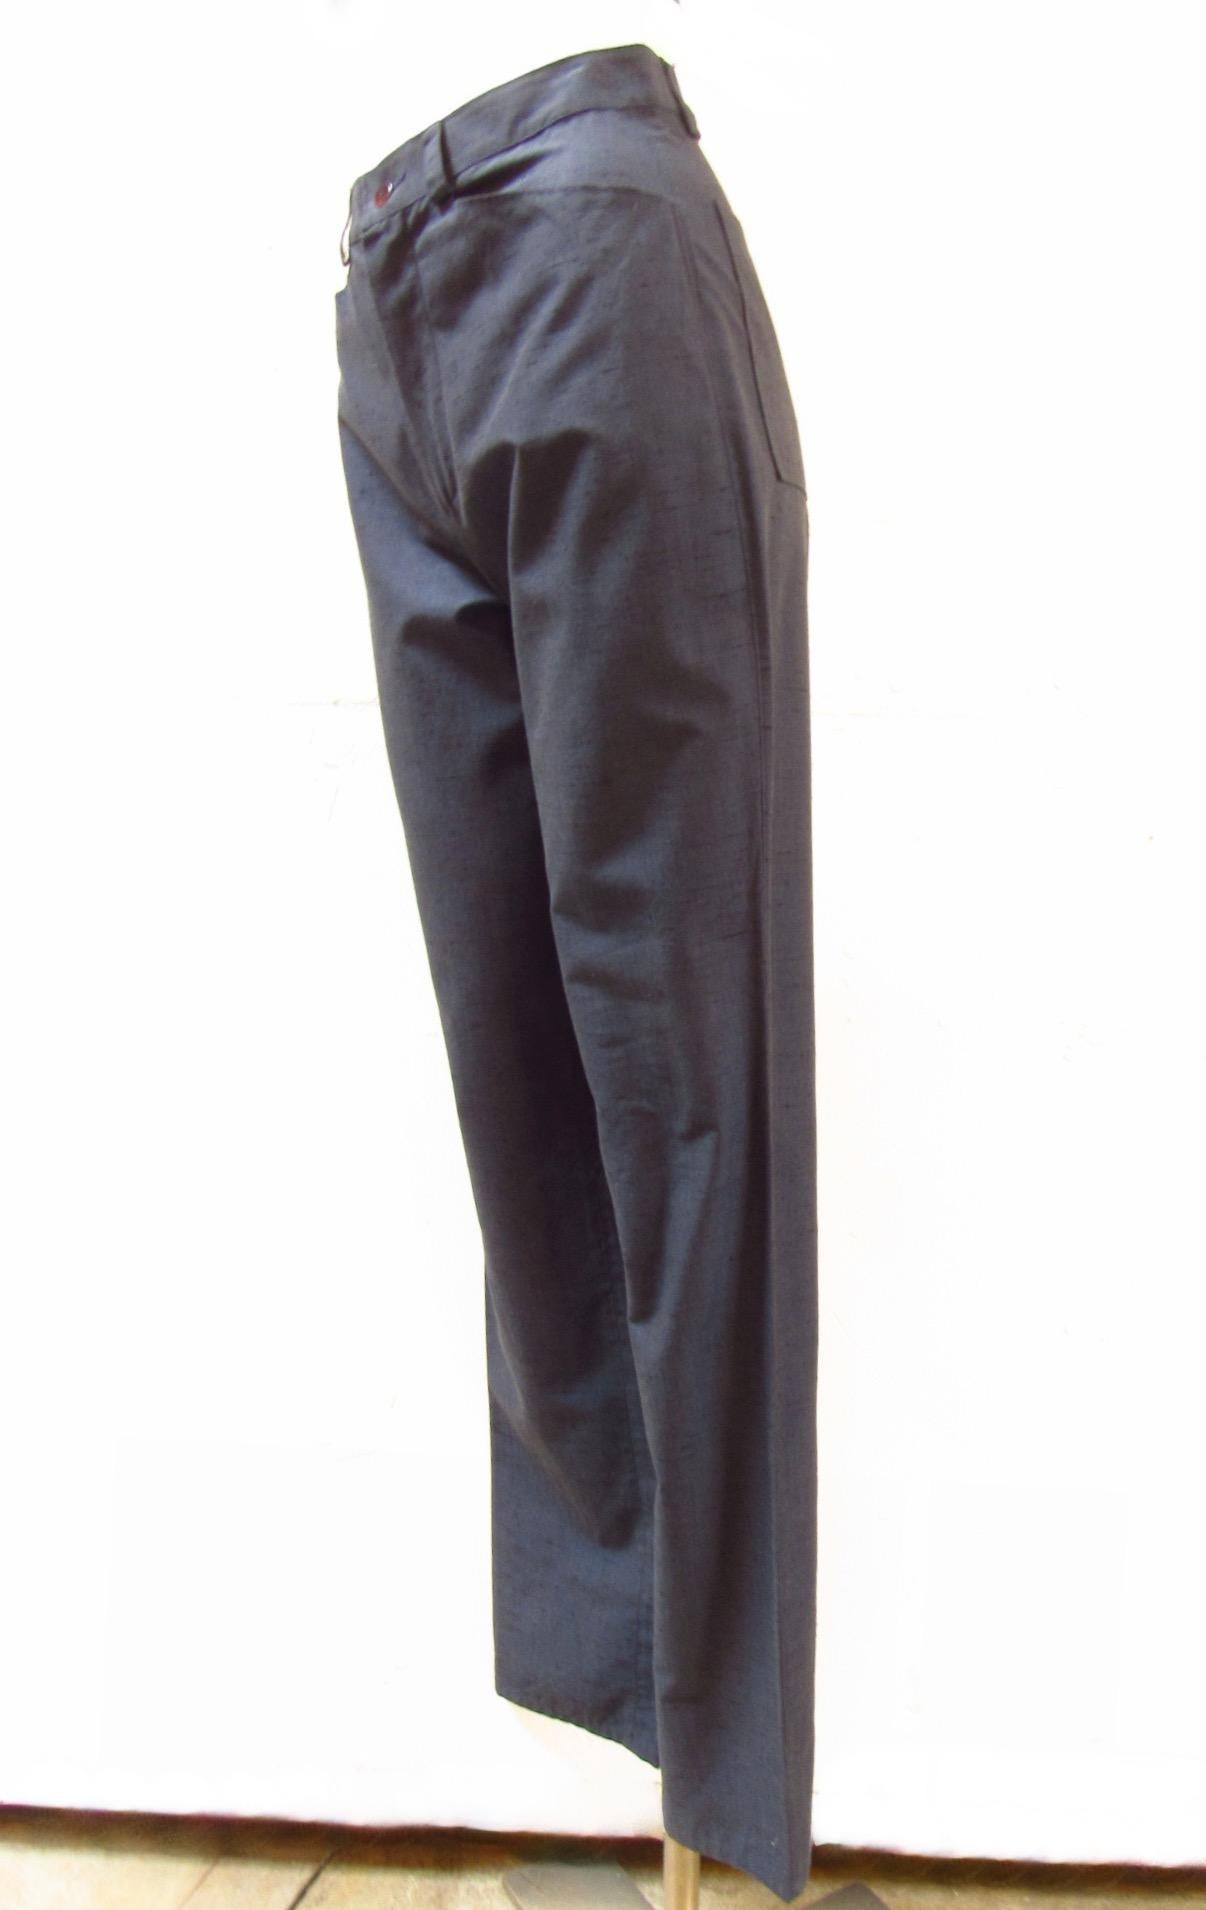 Vintage Jean Paul Gaultier Classique pants in a steely blue cotton and rayon blend with utilitarian pockets and belt loops.  